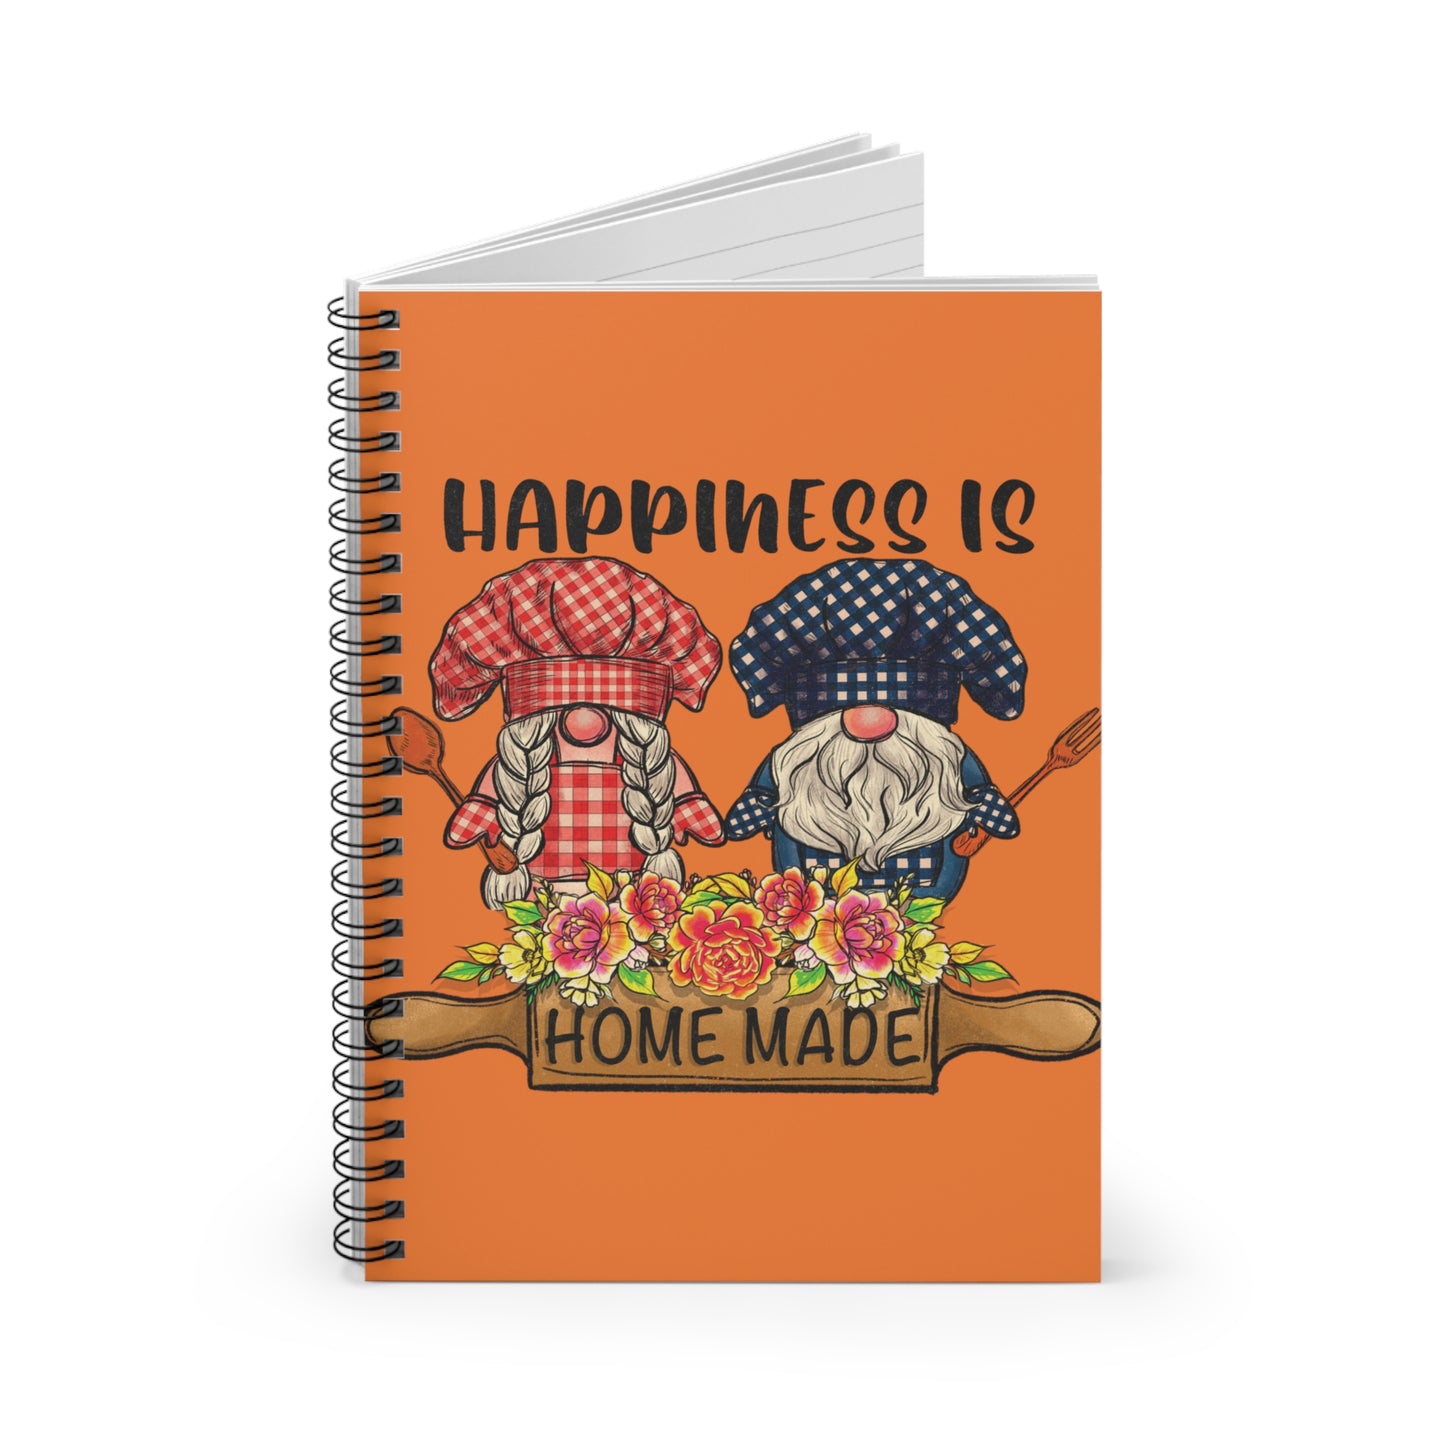 Happiness is Home Made: Spiral Notebook - Log Books - Journals - Diaries - and More Custom Printed by TheGlassyLass